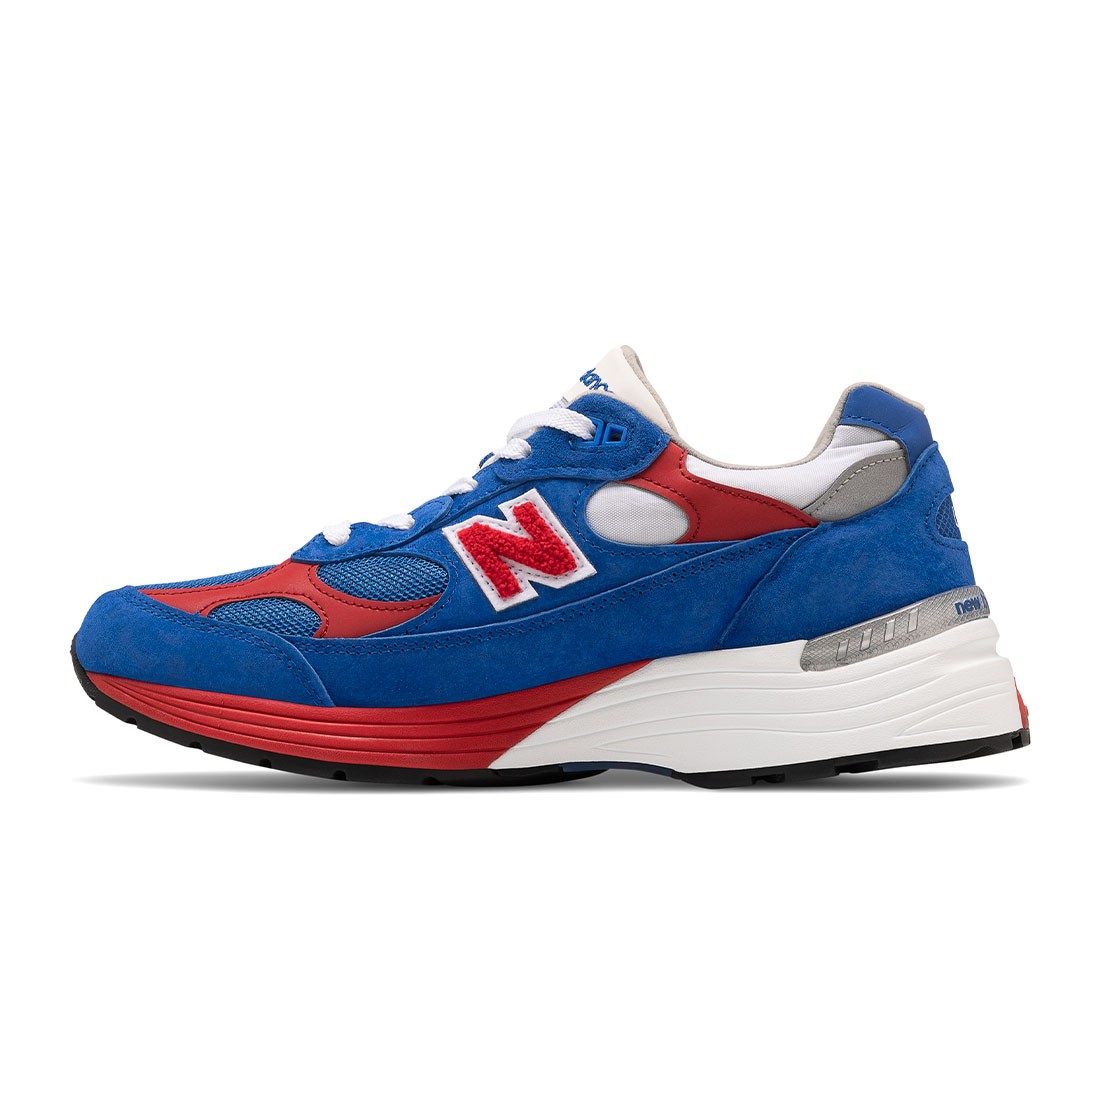 New Balance Men 992 M992CC - Made In USA (blue / red)